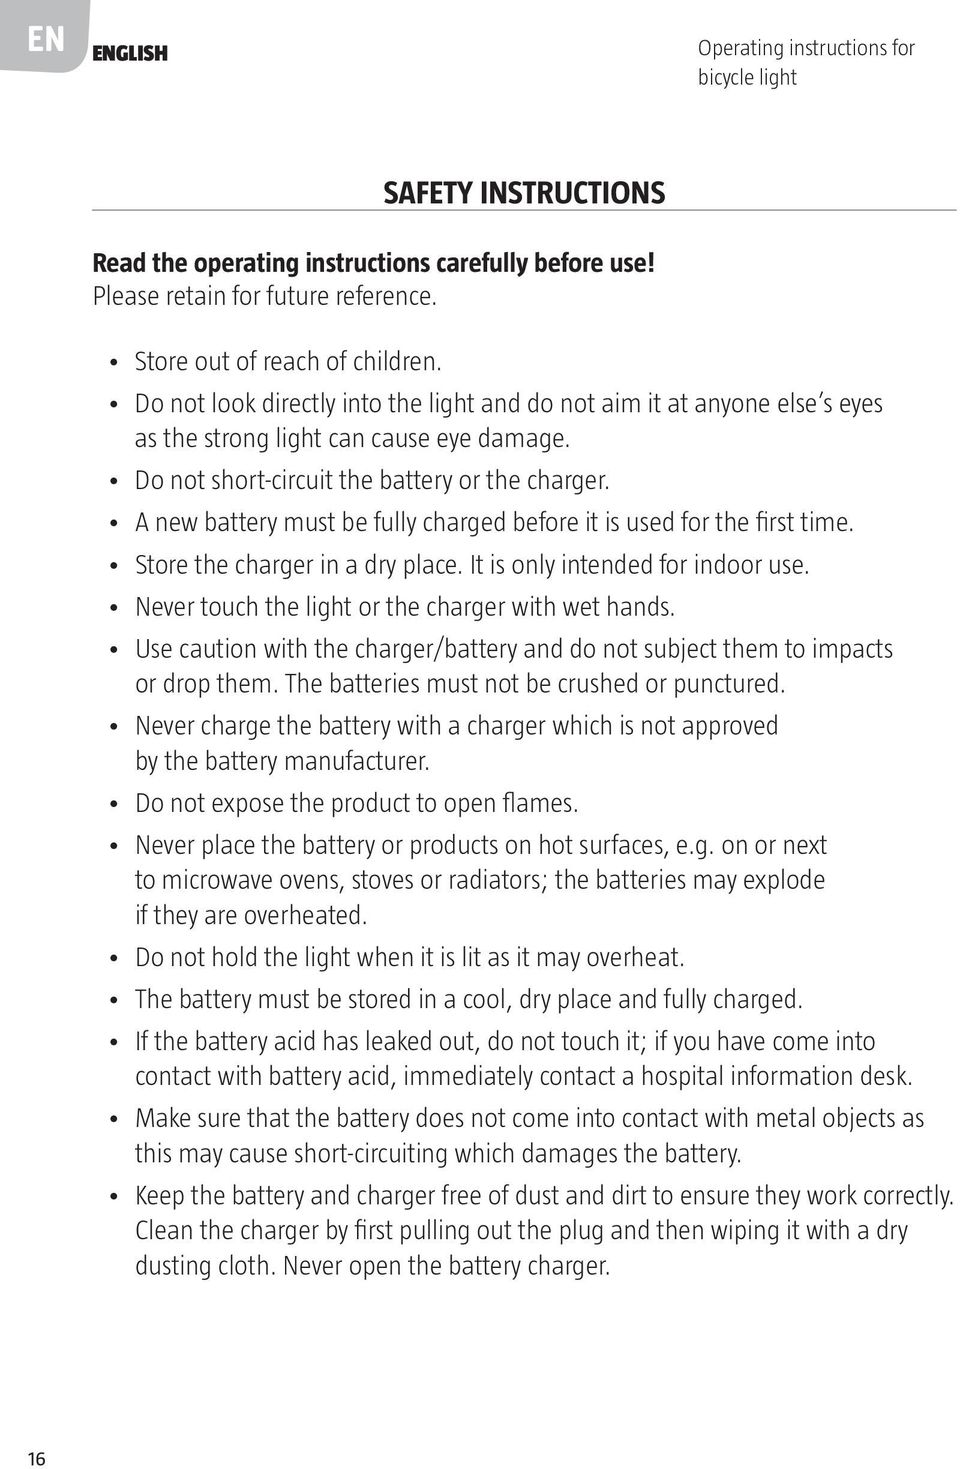 A new battery must be fully charged before it is used for the first time. Store the charger in a dry place. It is only intended for indoor use. Never touch the light or the charger with wet hands.